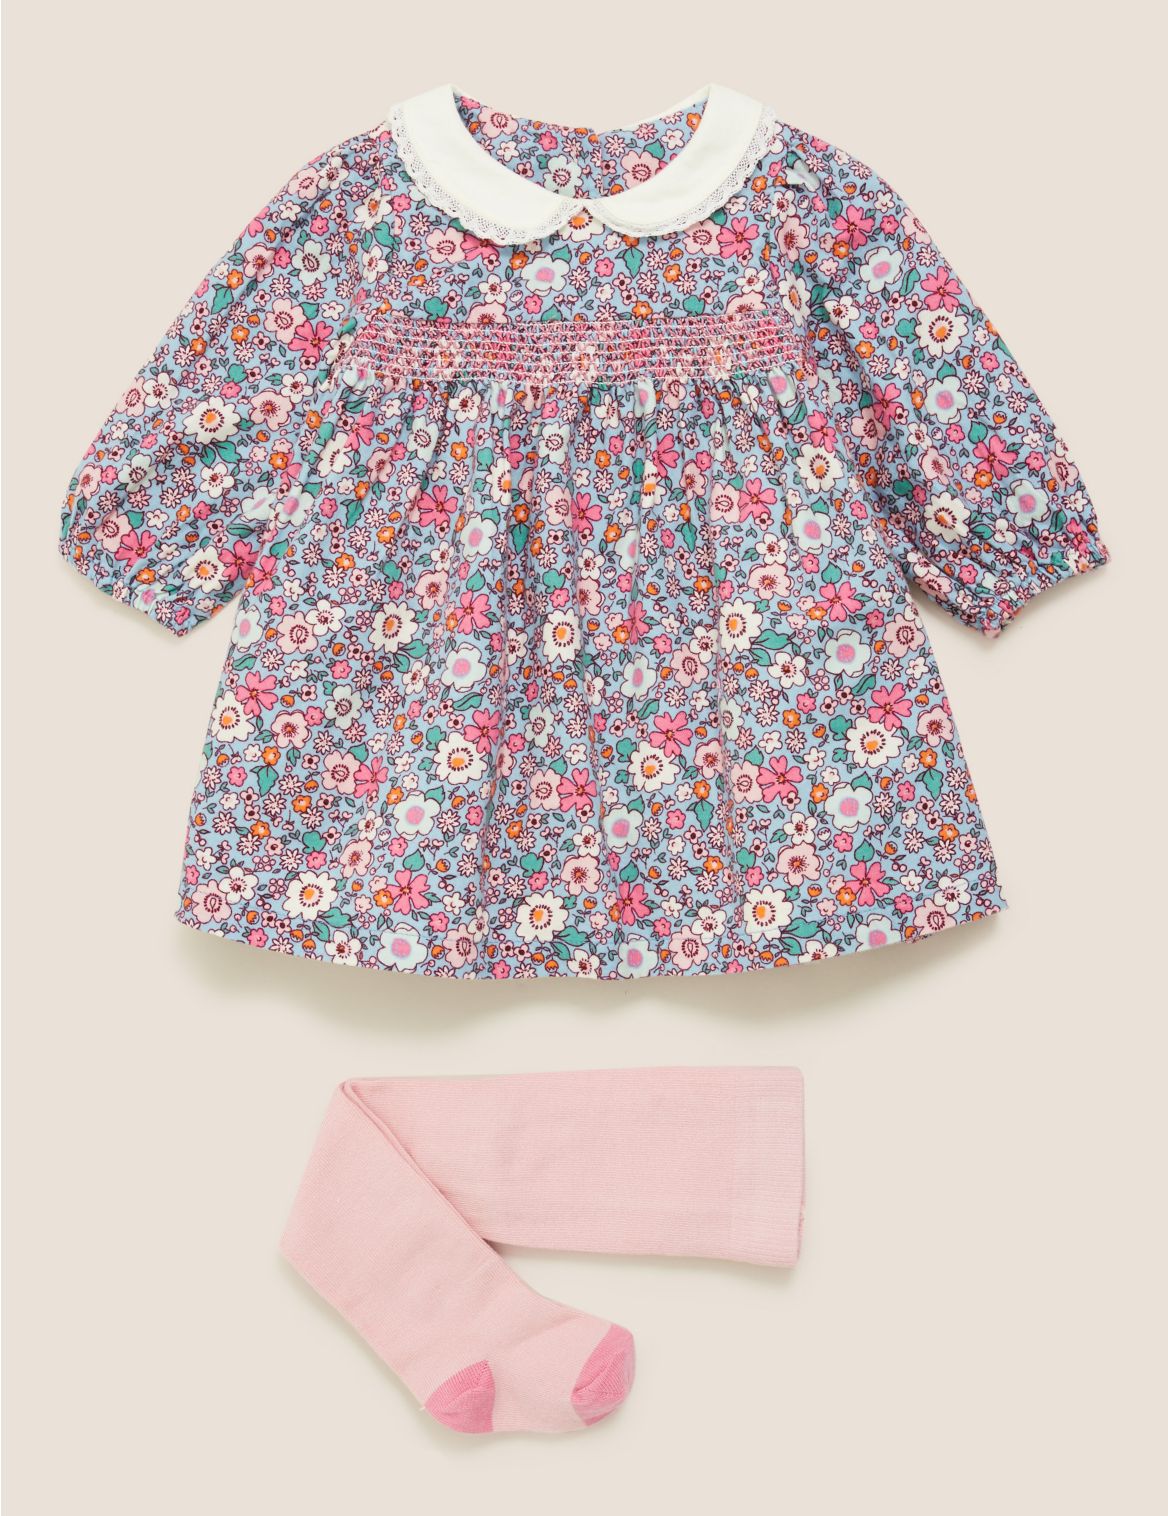 2pc Cotton Floral Print Dress Outfit (0-3 Yrs) pink